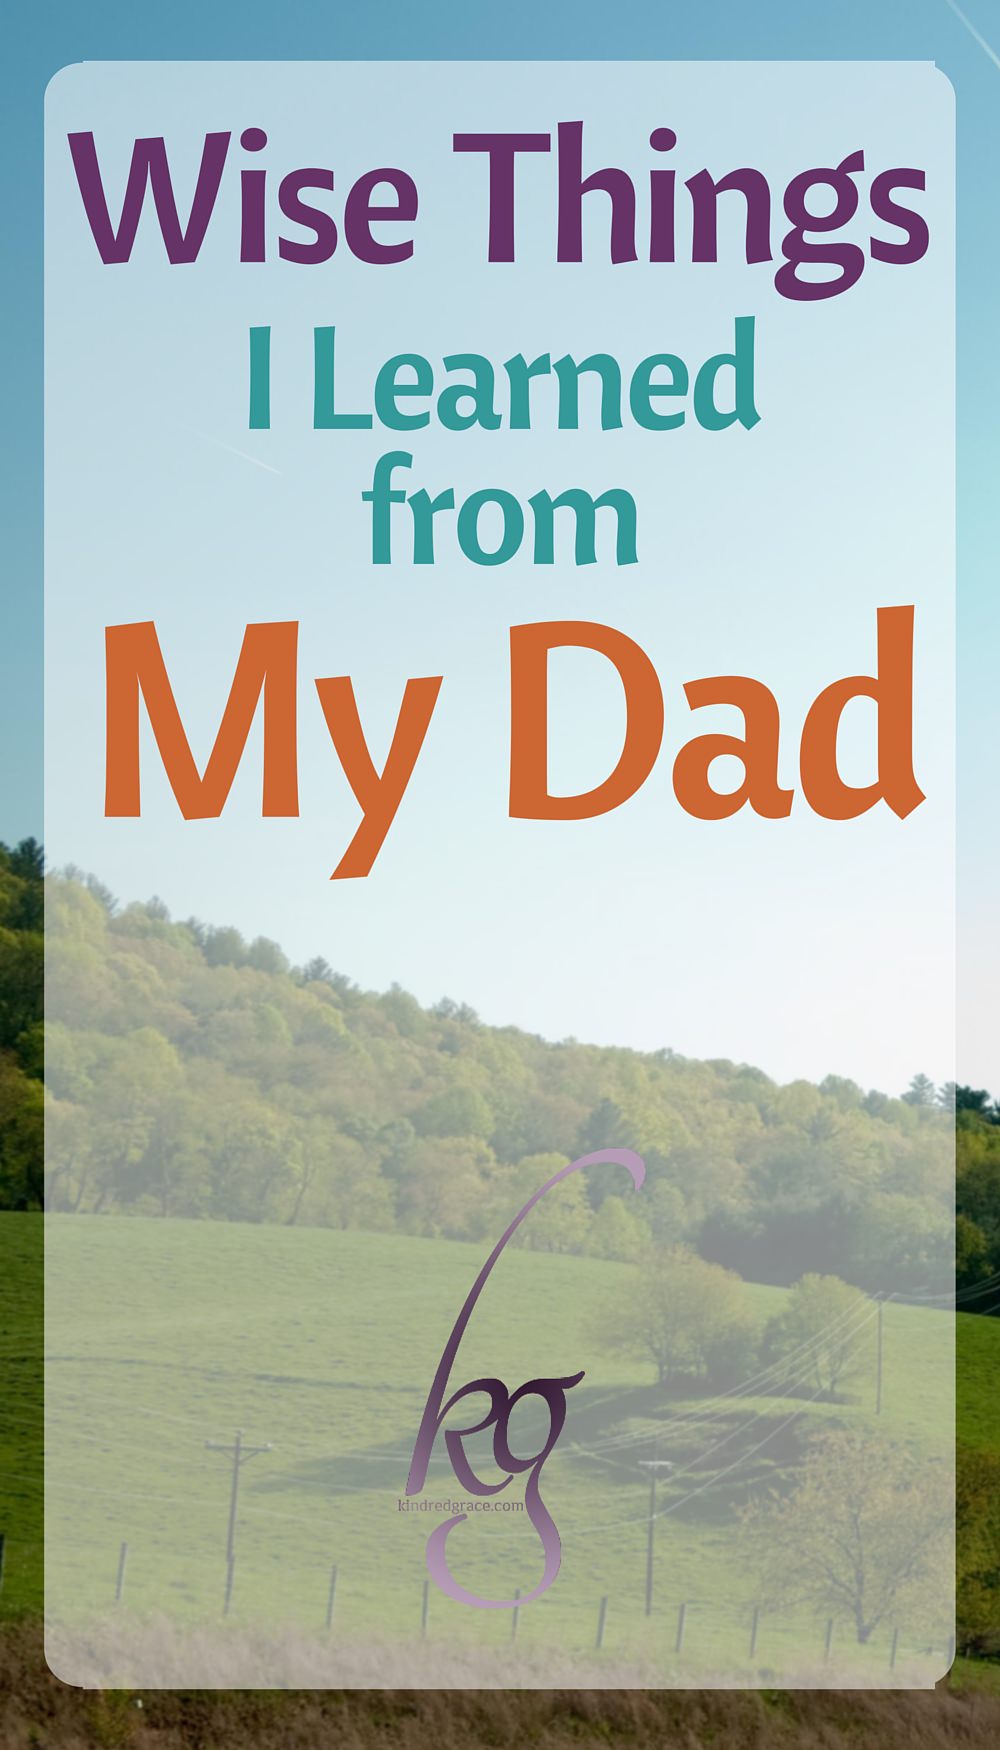 Ten Wise Things I Learned From My Dad via @KindredGrace